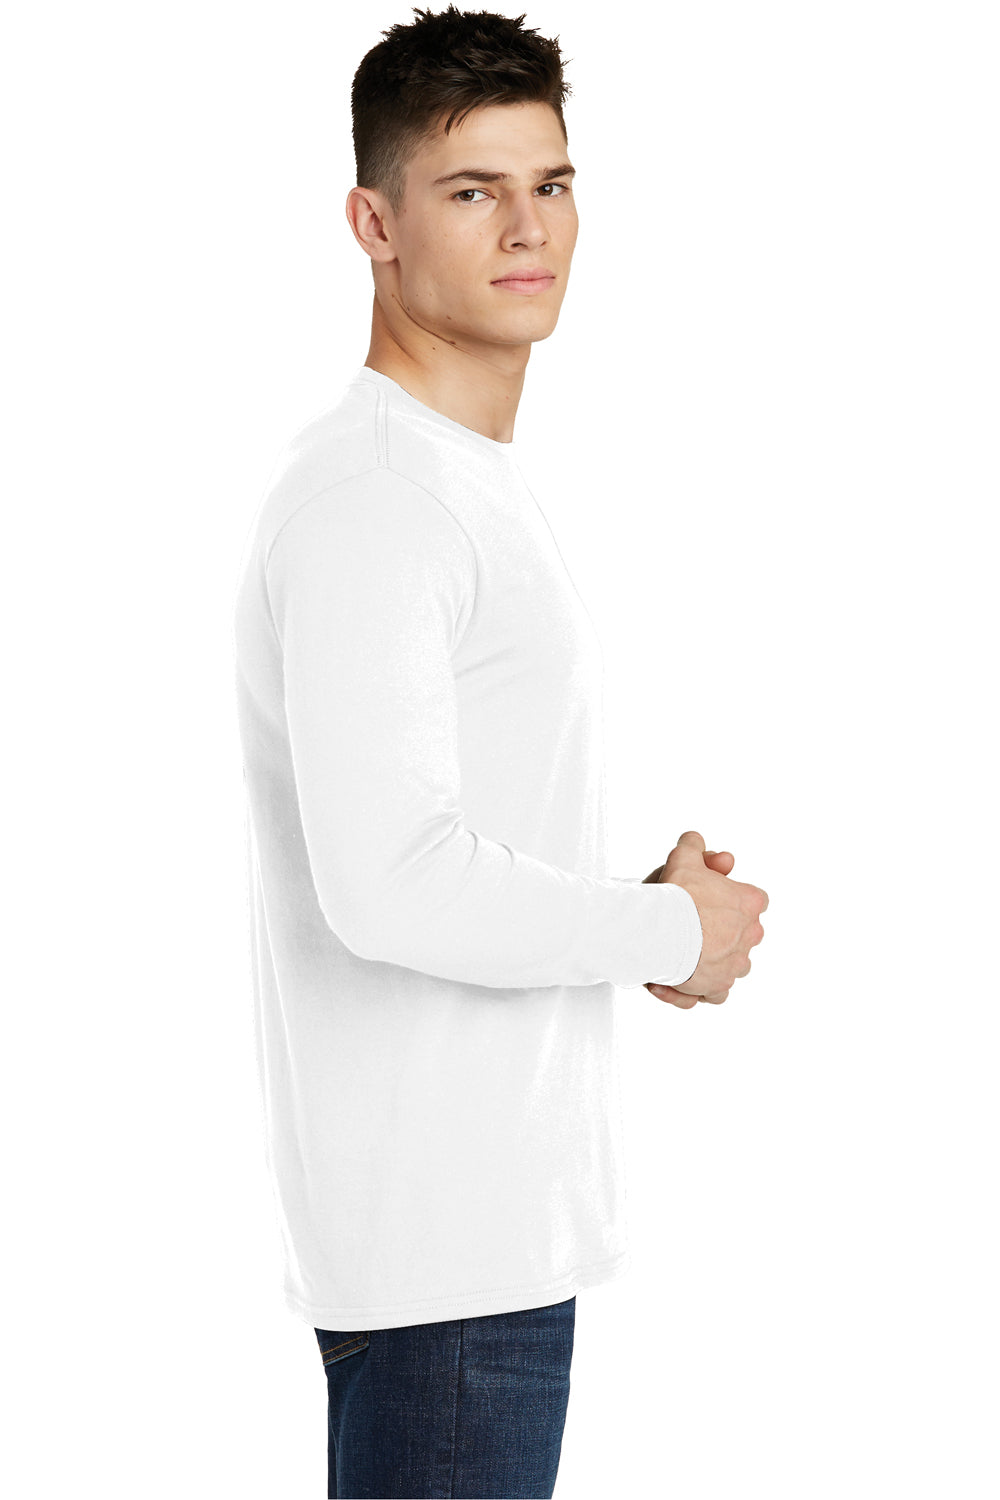 District DT6200 Mens Very Important Long Sleeve Crewneck T-Shirt White Side